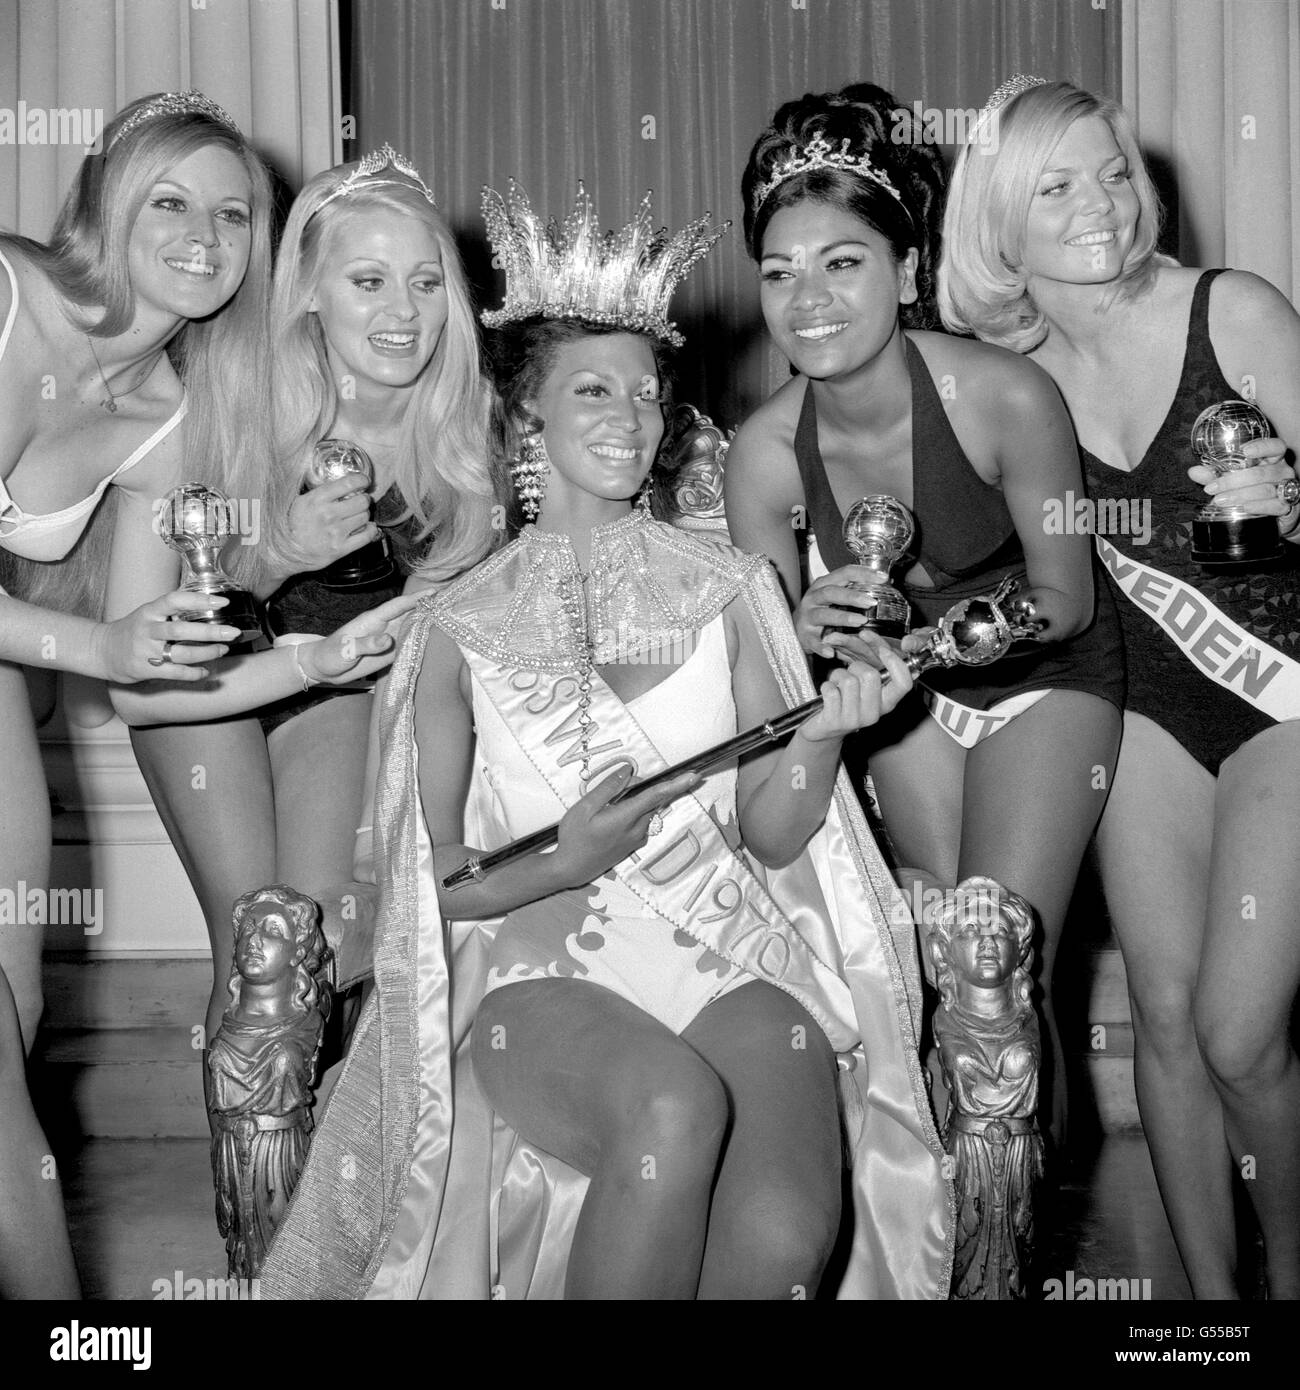 MISS WORLD 1970: Five finalists in the Miss World 1970 contest at the Royal Albert Hall - the winner, Jennifer Hosten (Miss Grenada), 22, surrounded by (l-r) Miss Israel, Miss South Africa, Miss Africa South and Miss Sweden. Stock Photo